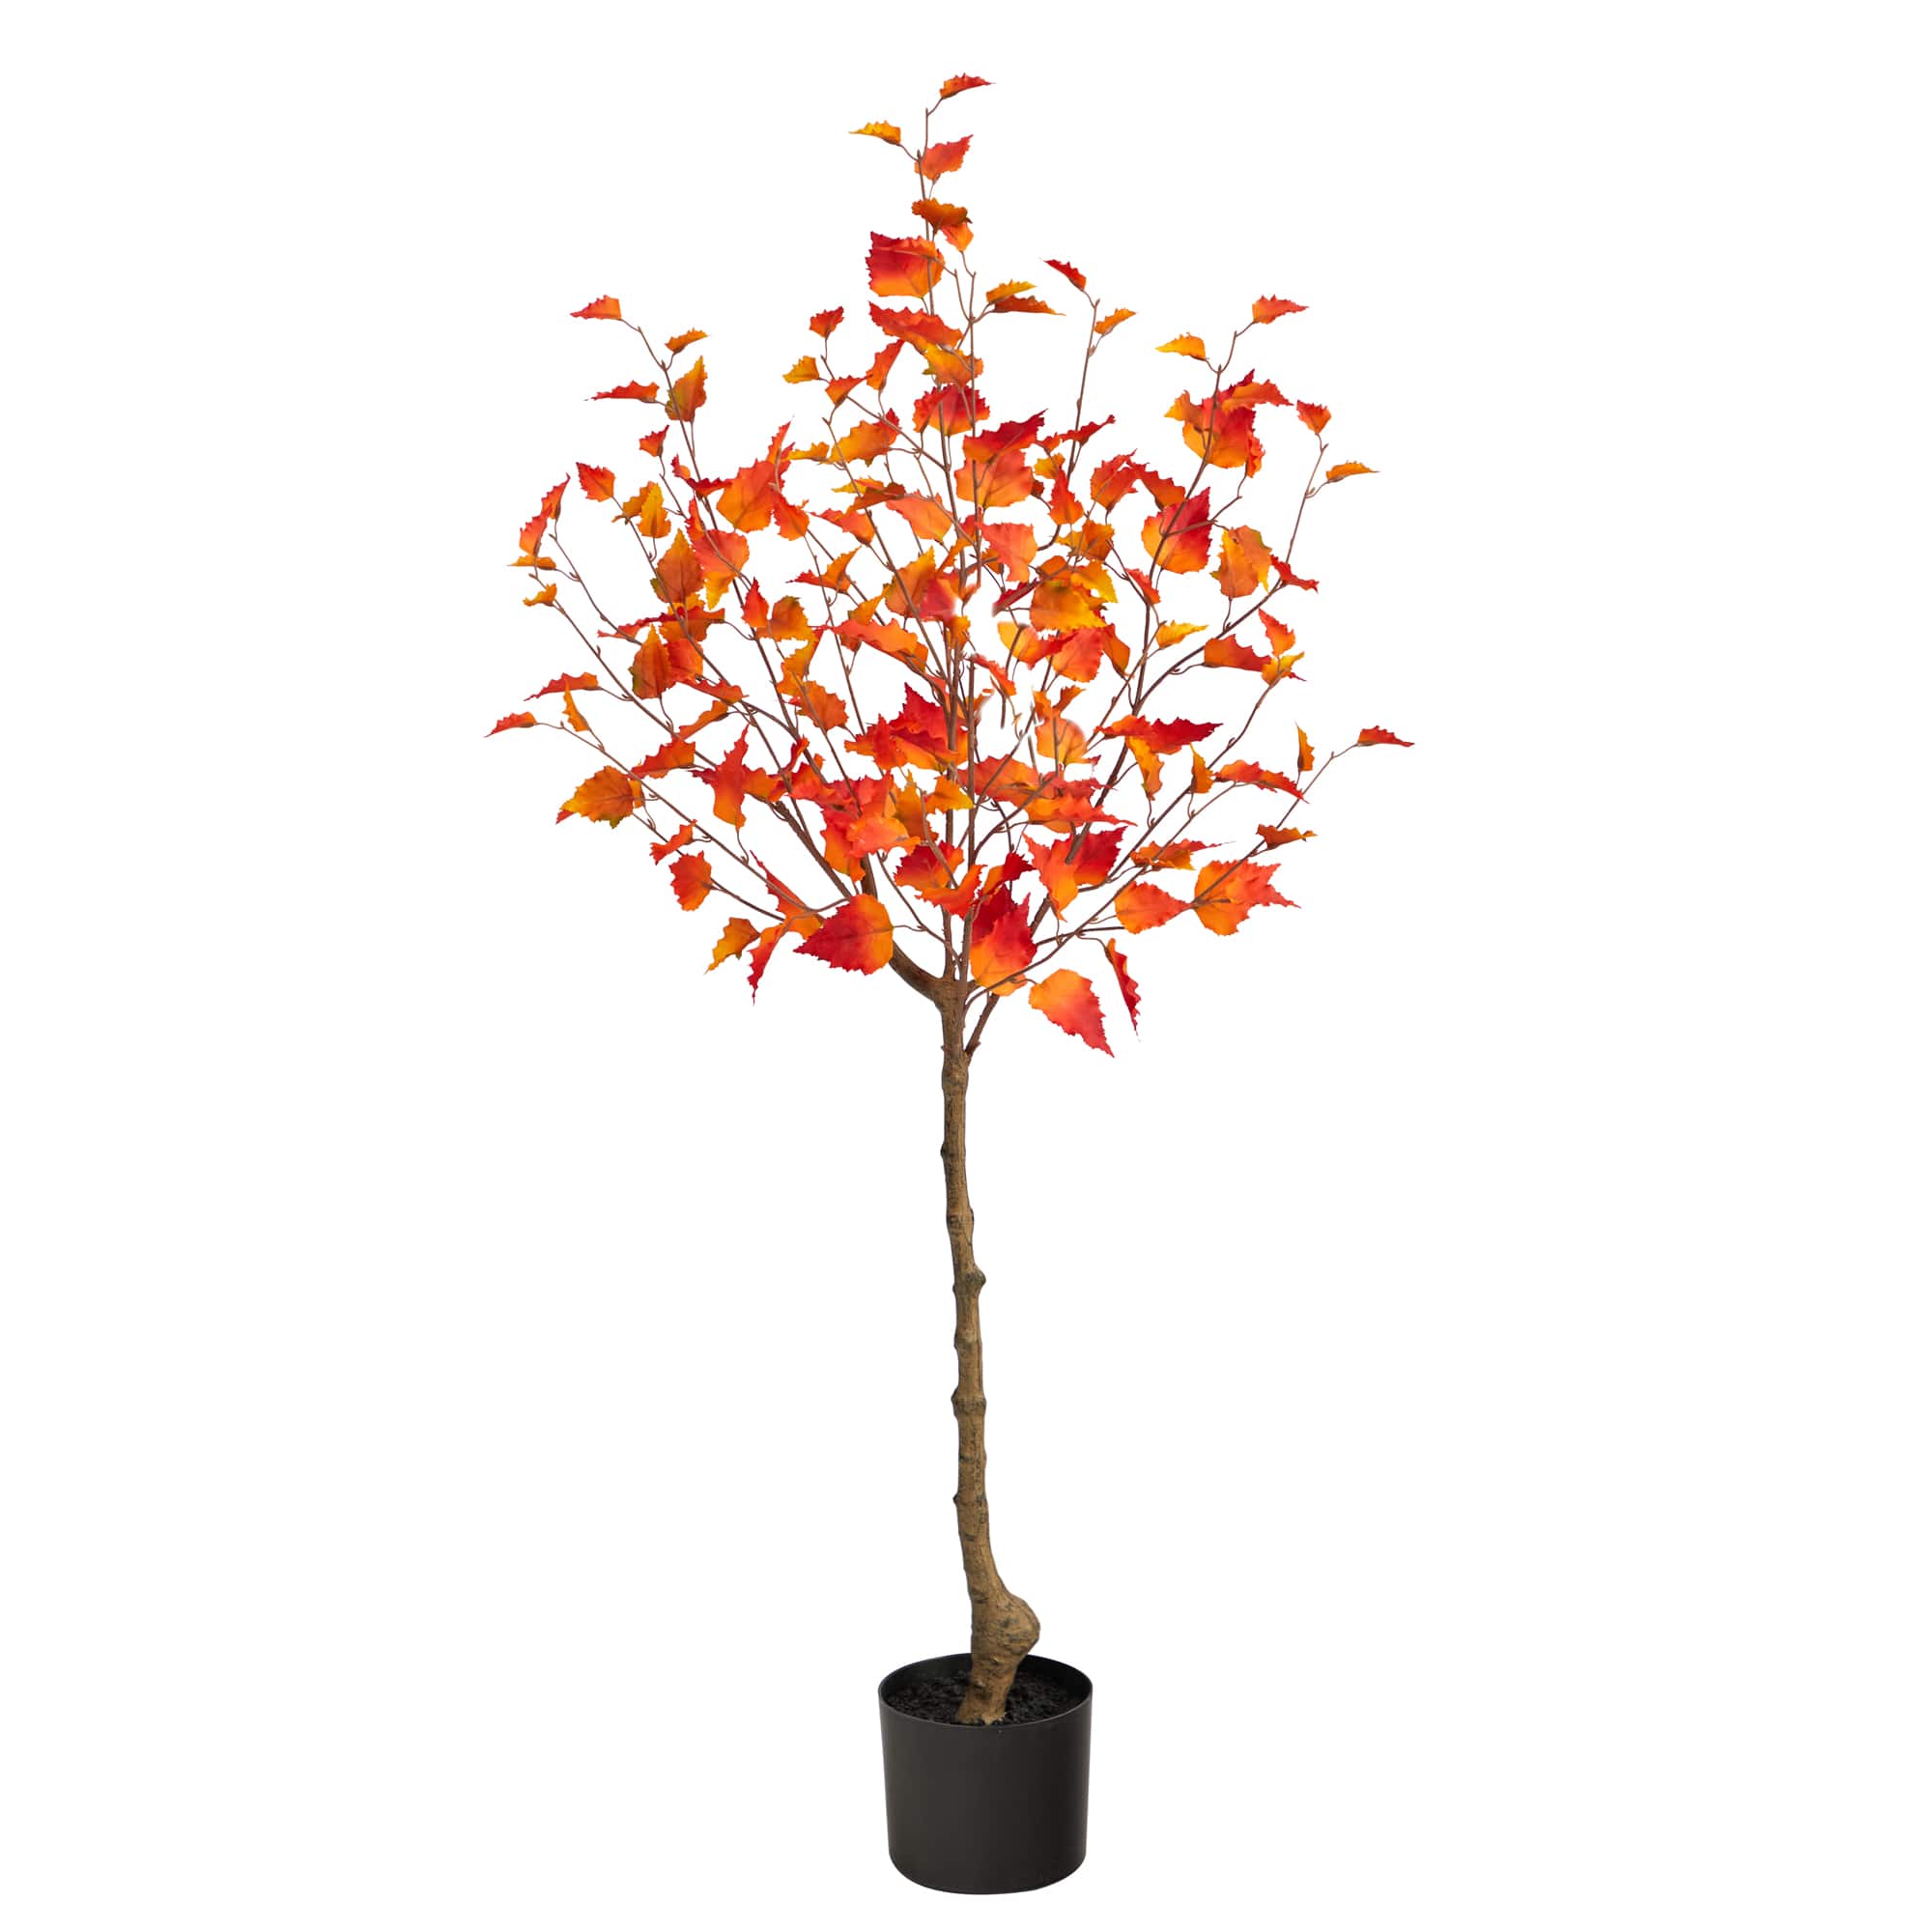 4ft. Potted Fall Birch Autumn Tree